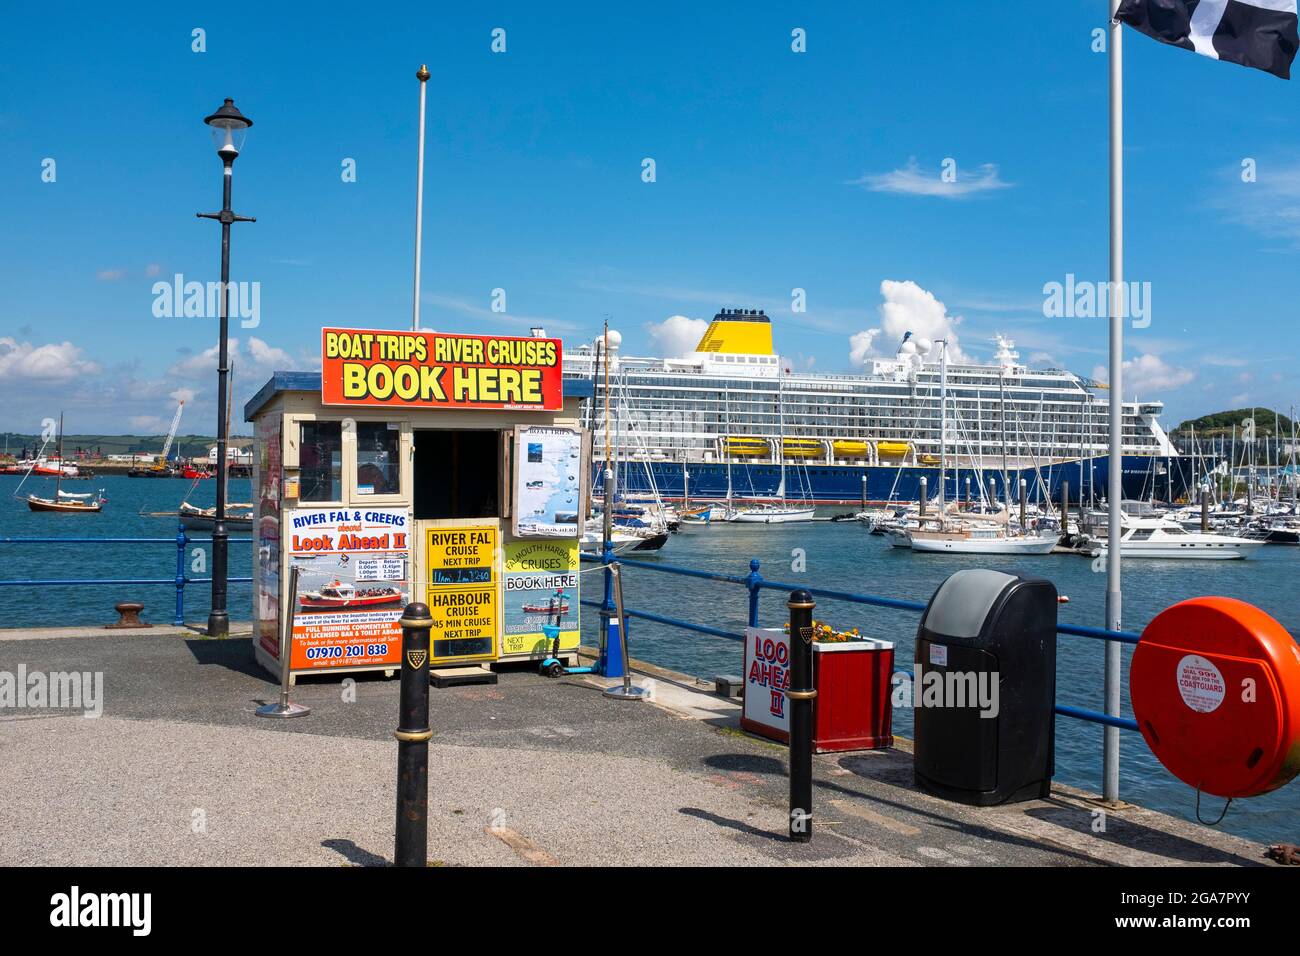 The Saga cruise ship 'Spirit of Discovery' moored at Falmouth harbour, Cornwall, England. Stock Photo